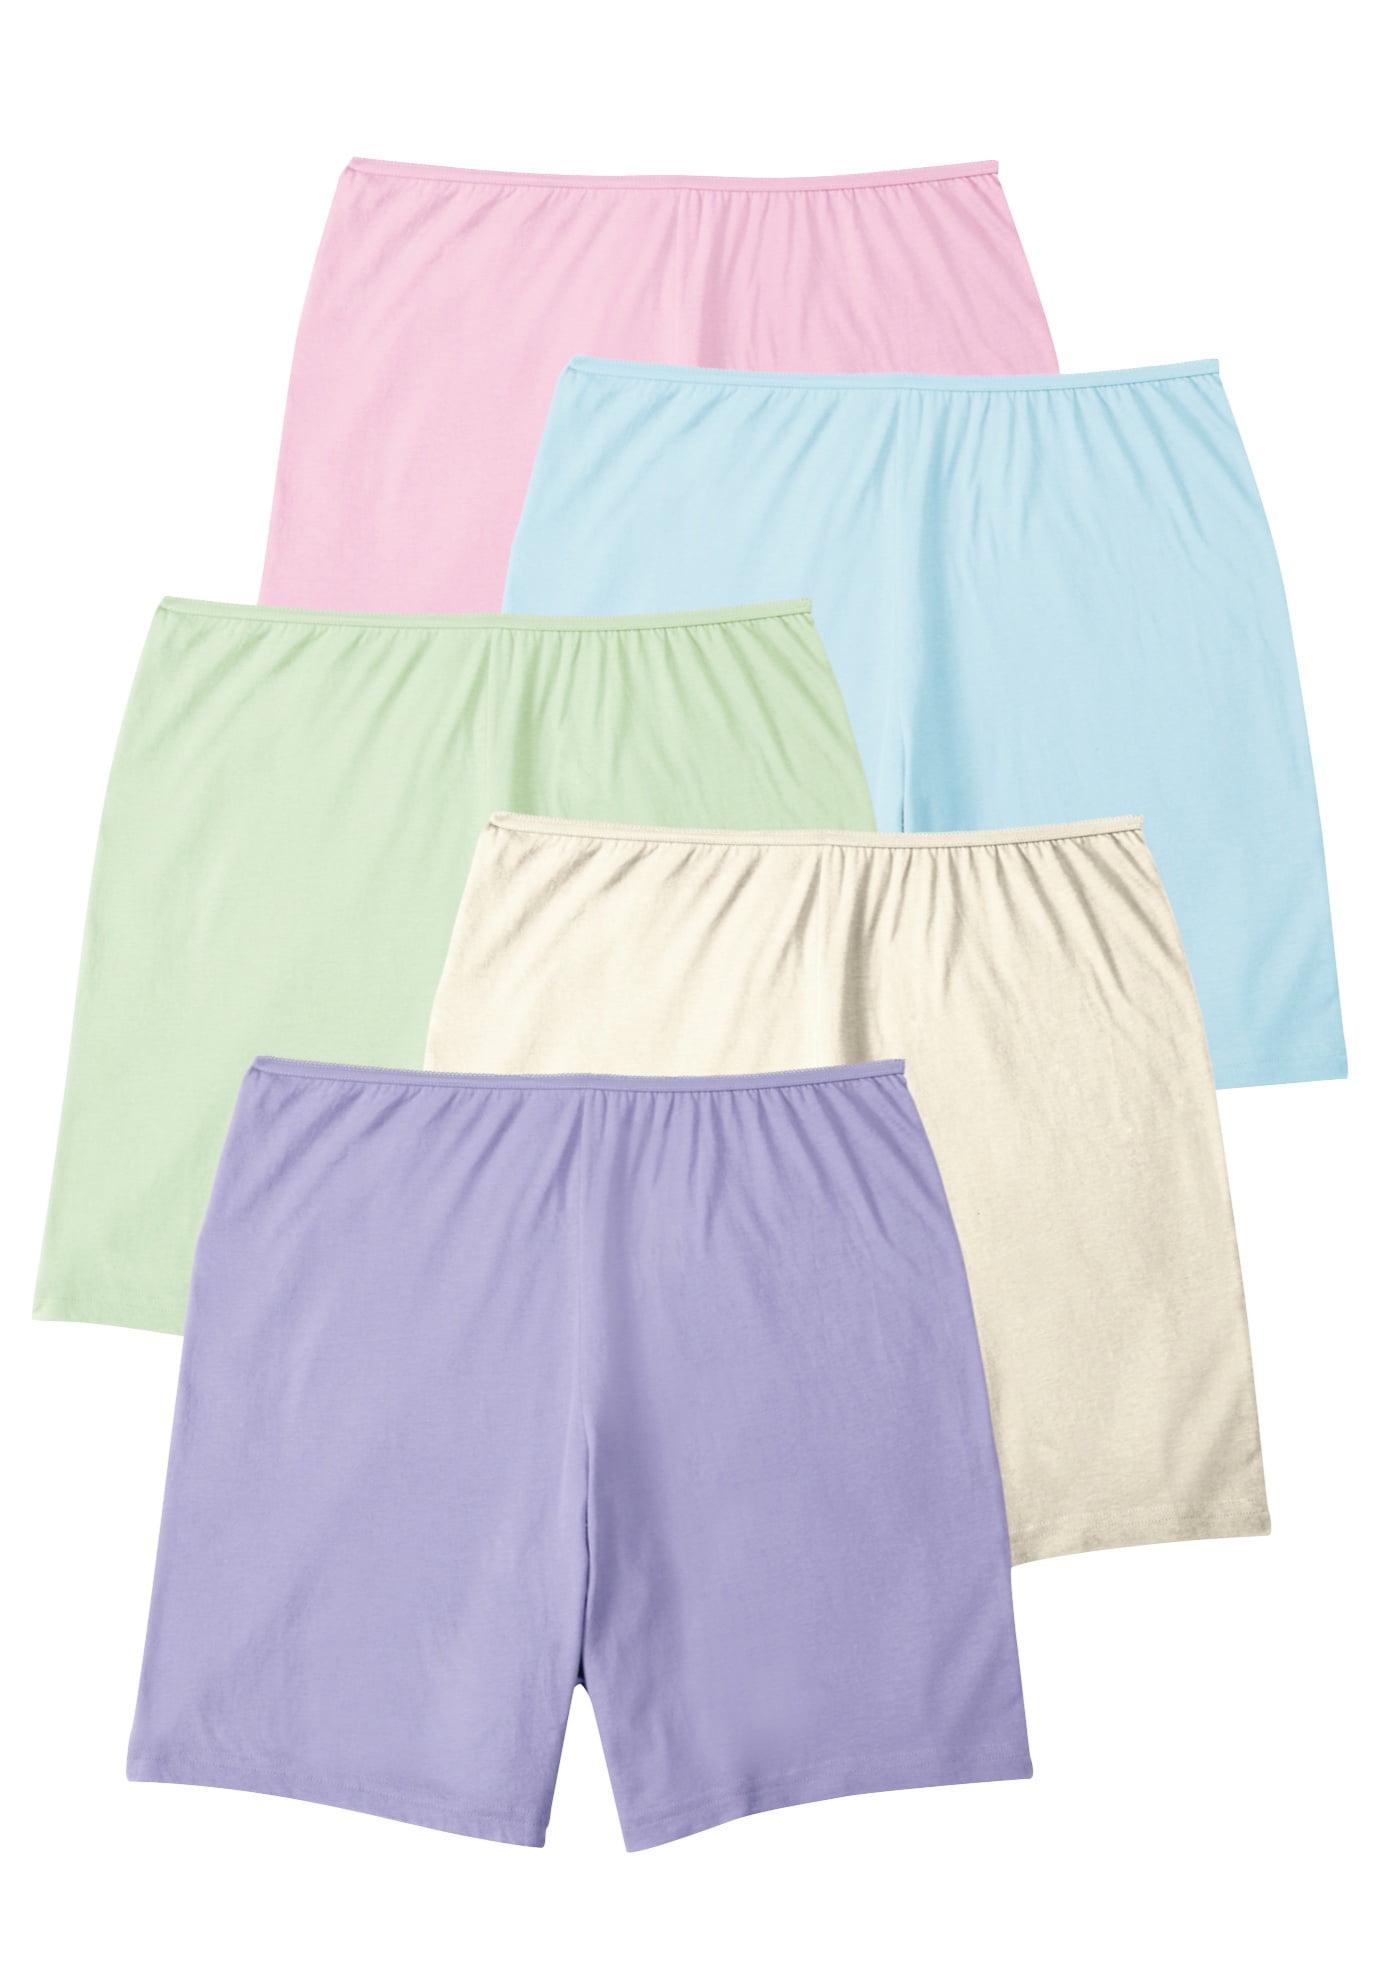 Comfort Choice Women's Plus Size Stretch Cotton Brief 5-pack, 15 - Basic  Pack : Target